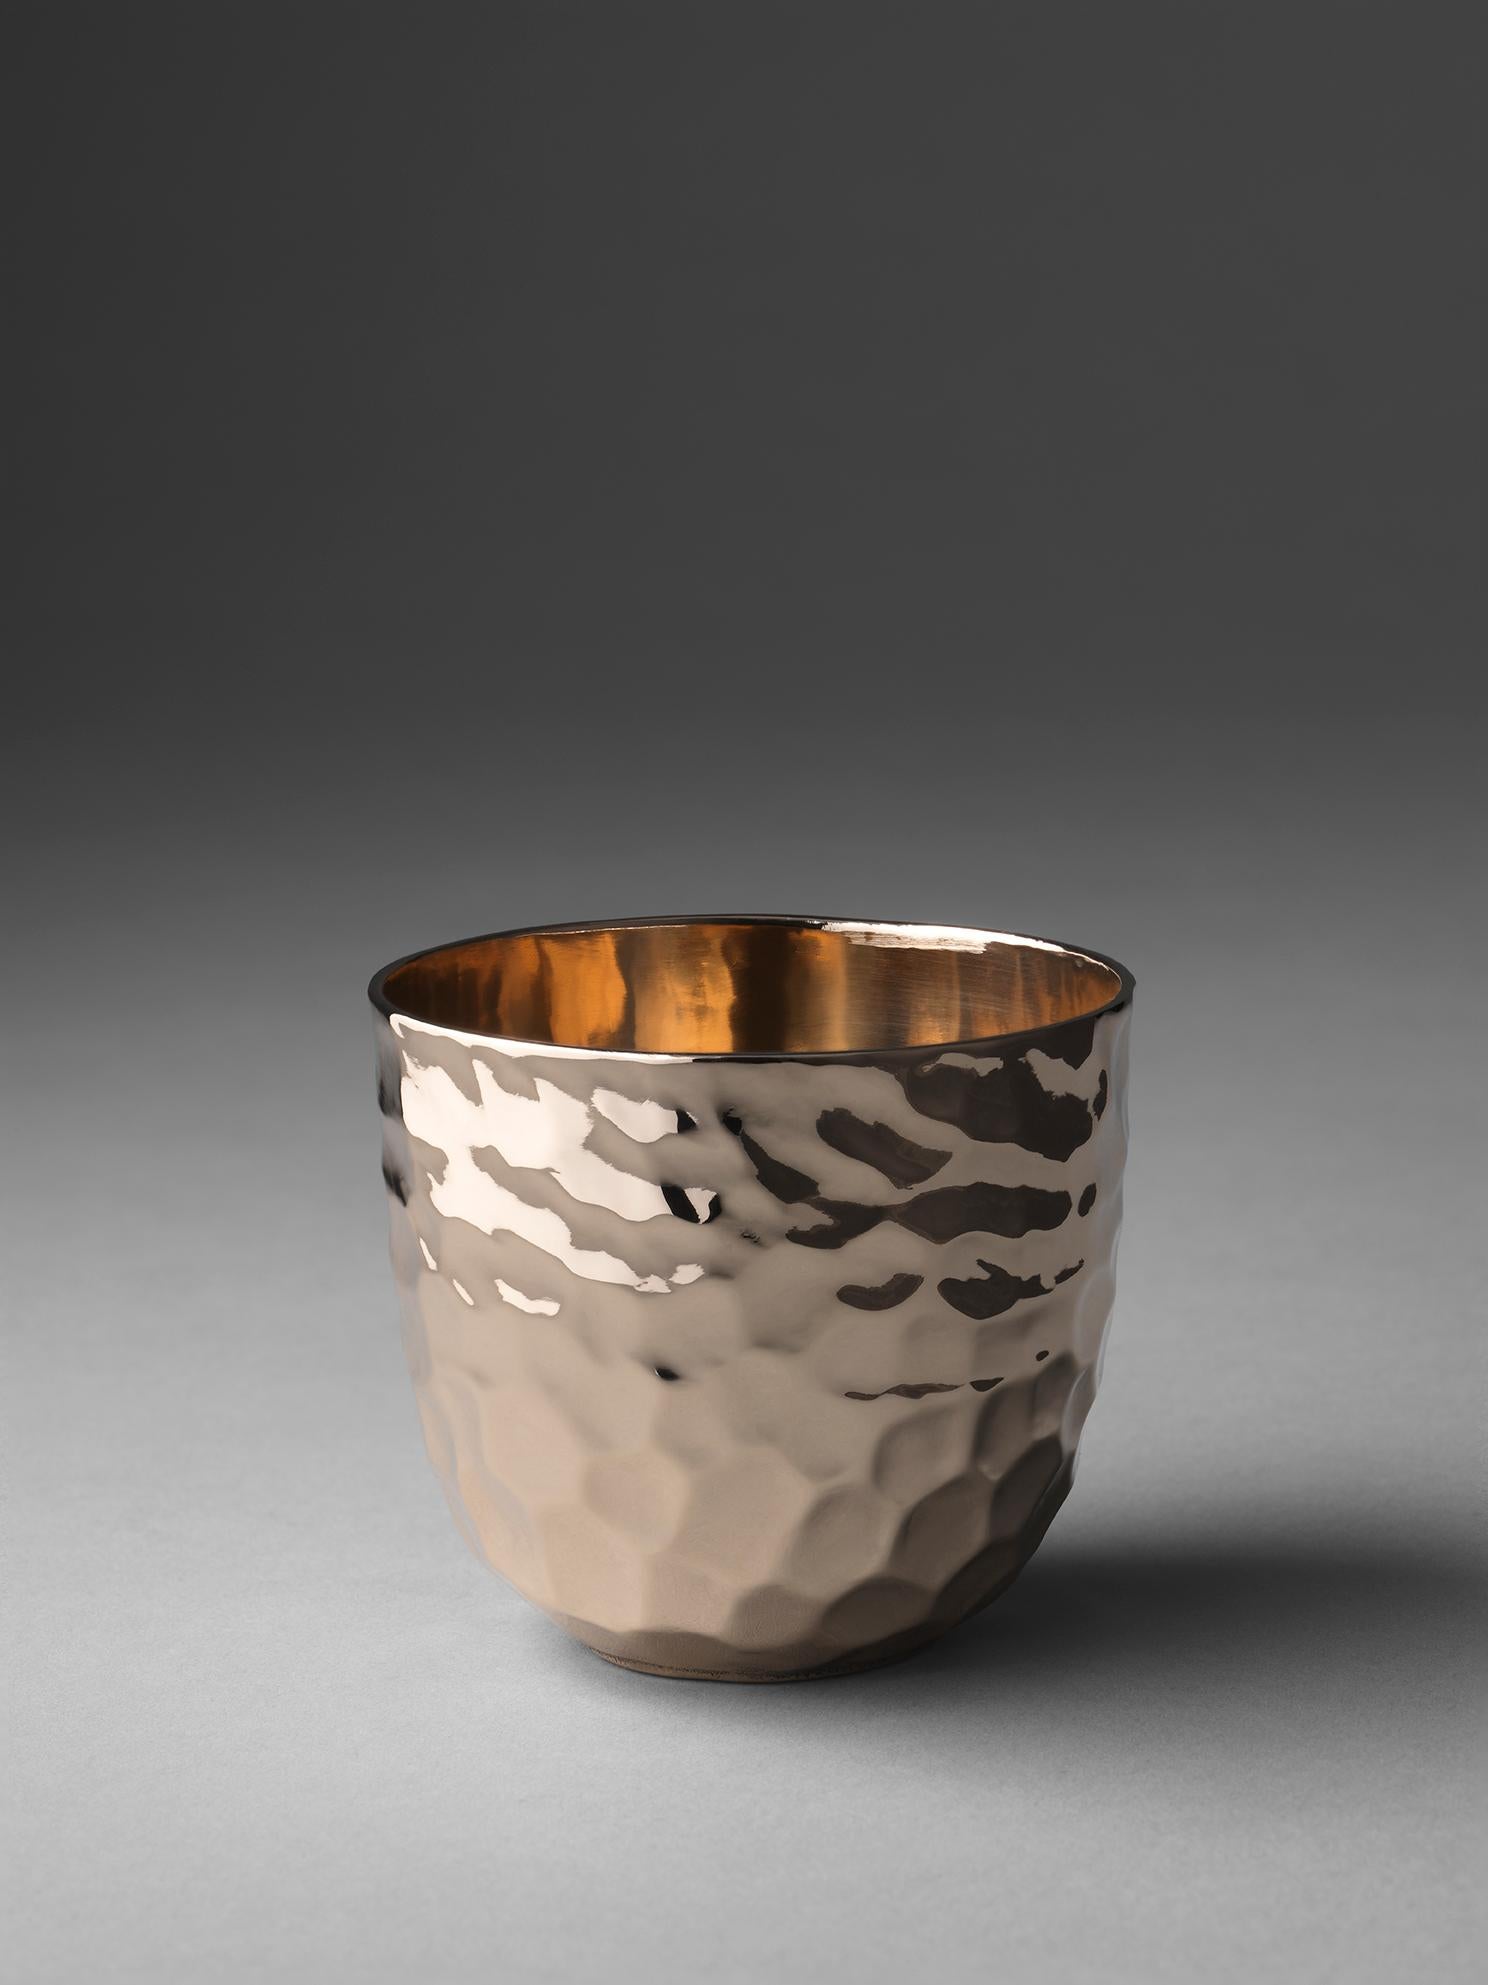 A bronze cup. The hand-wrought exterior contrasts nicely to the smooth inner wall. The lip is 2mm for fine sipping. It holds 125ml